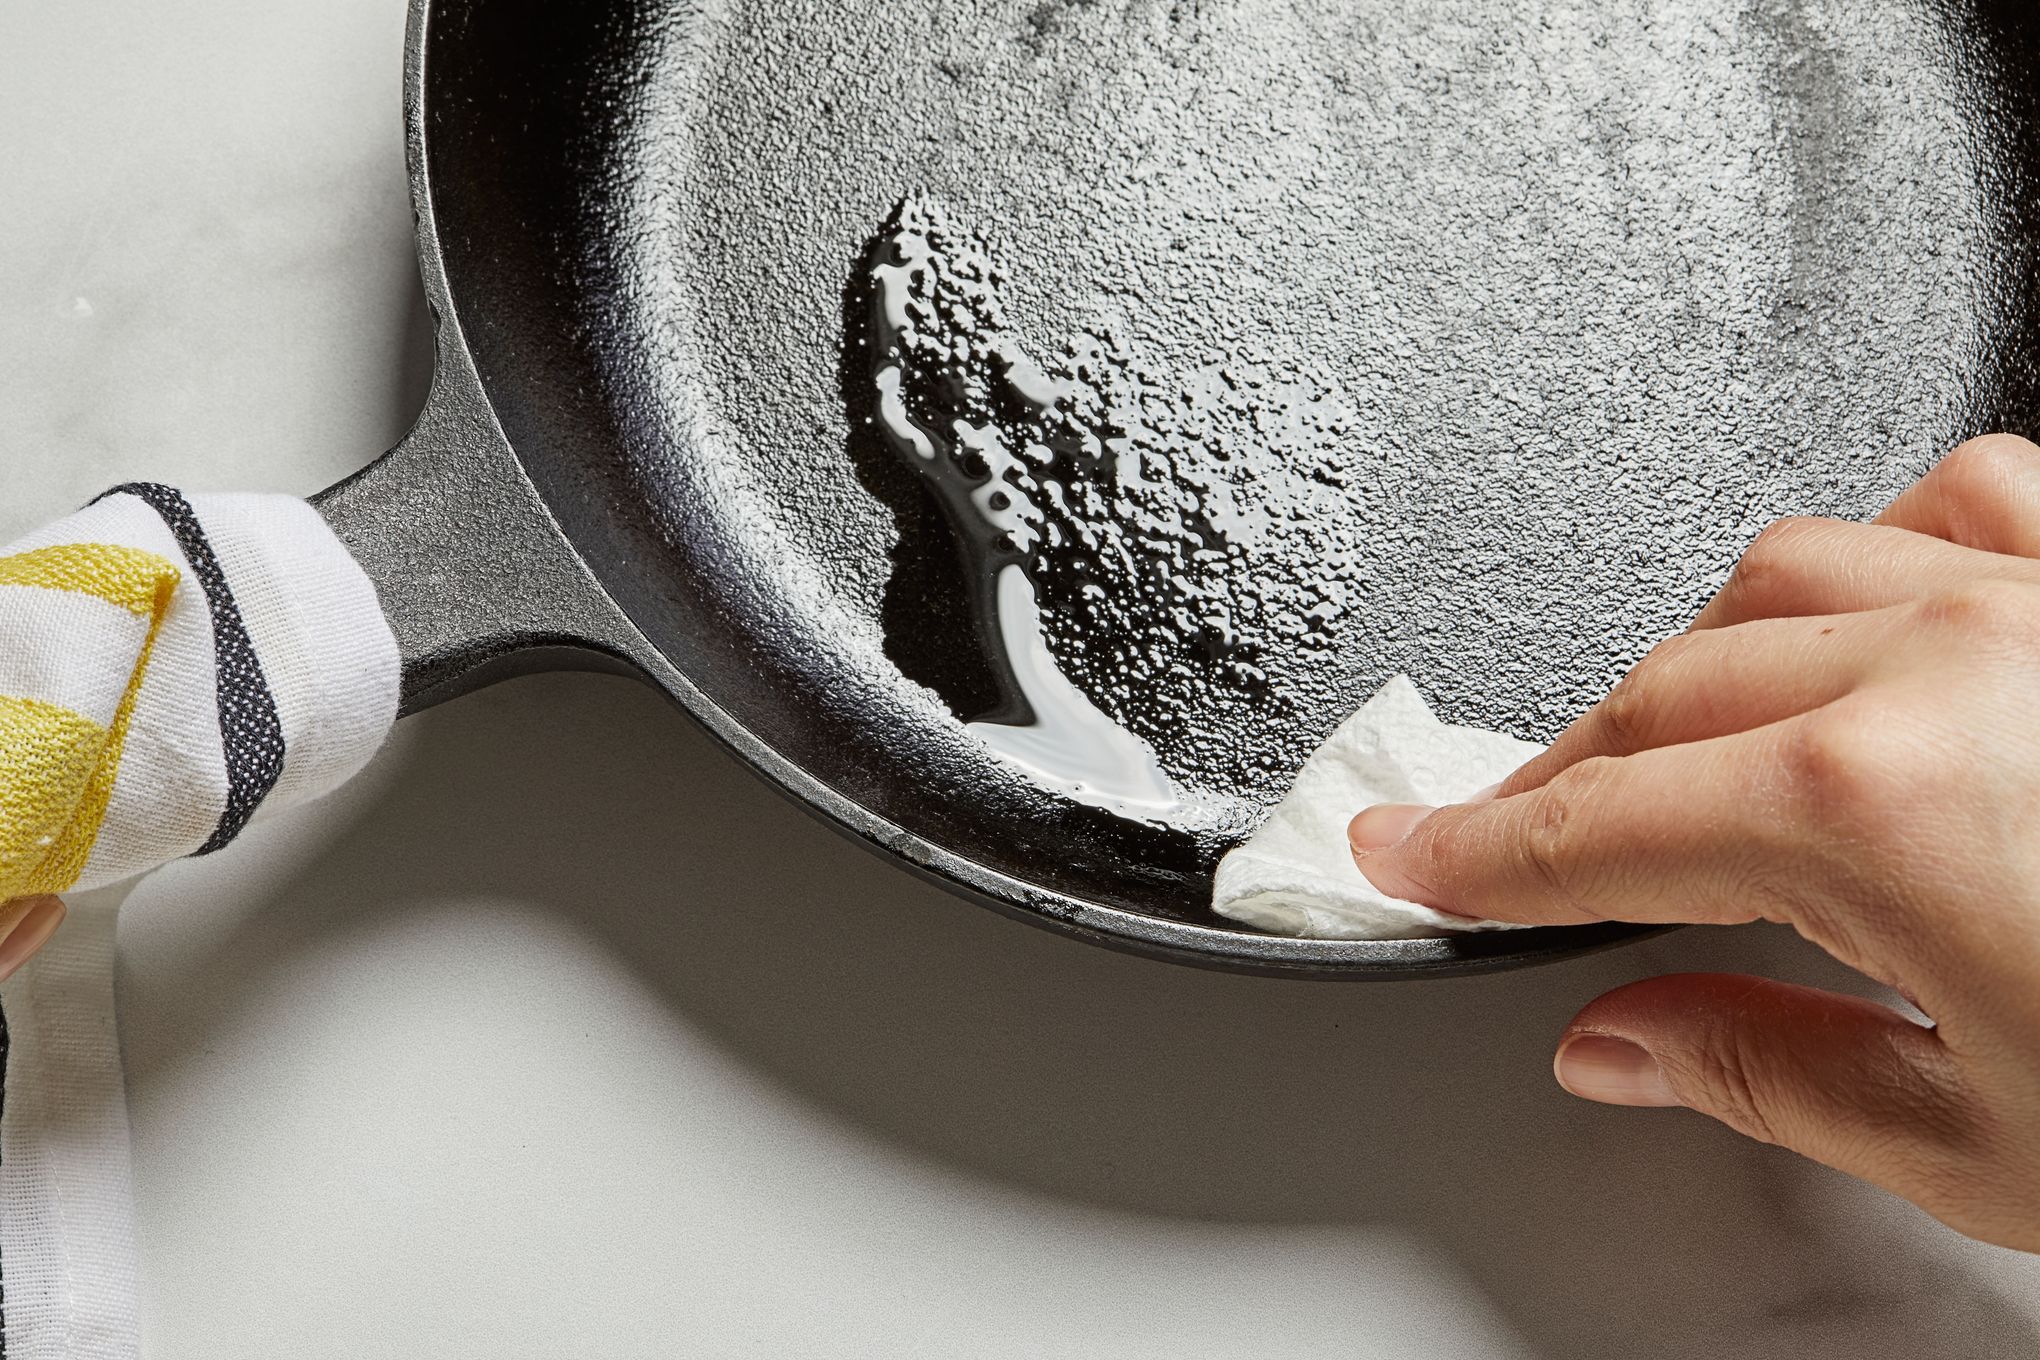 How to season your cast-iron skillet — and keep it seasoned